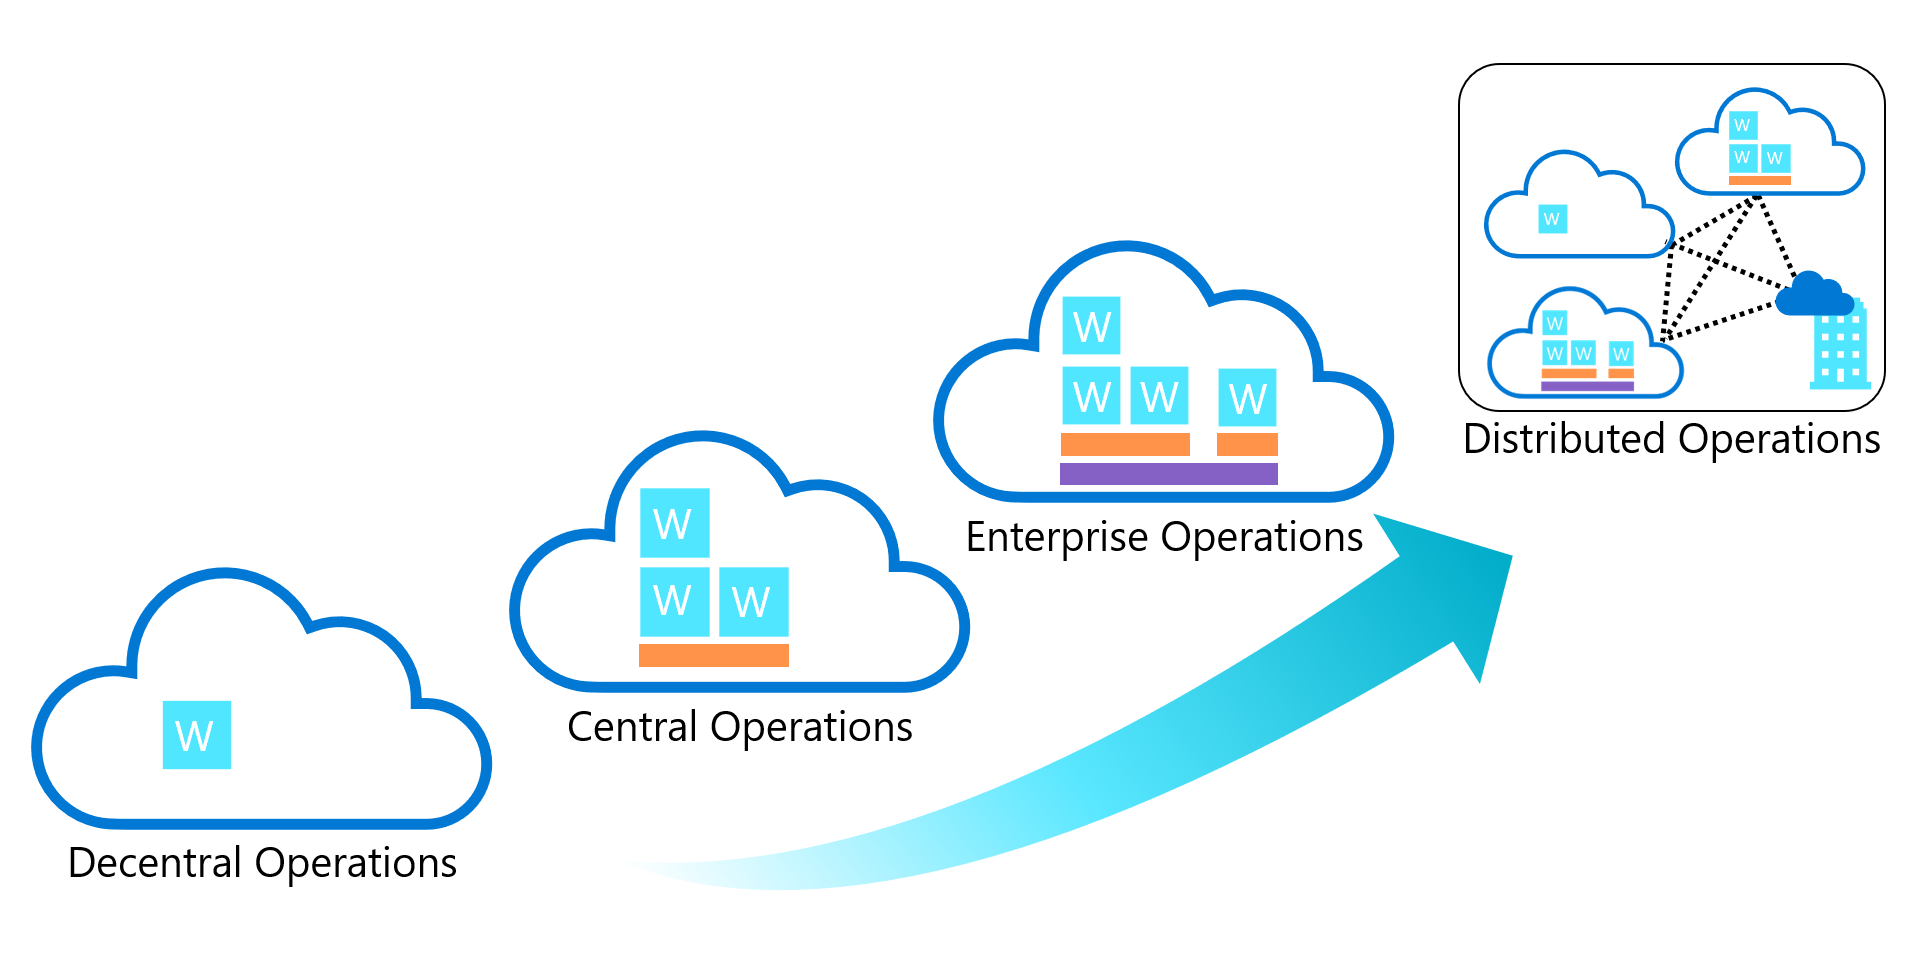 Diagram that shows four common operating models: decentralized, centralized, enterprise, and distributed.